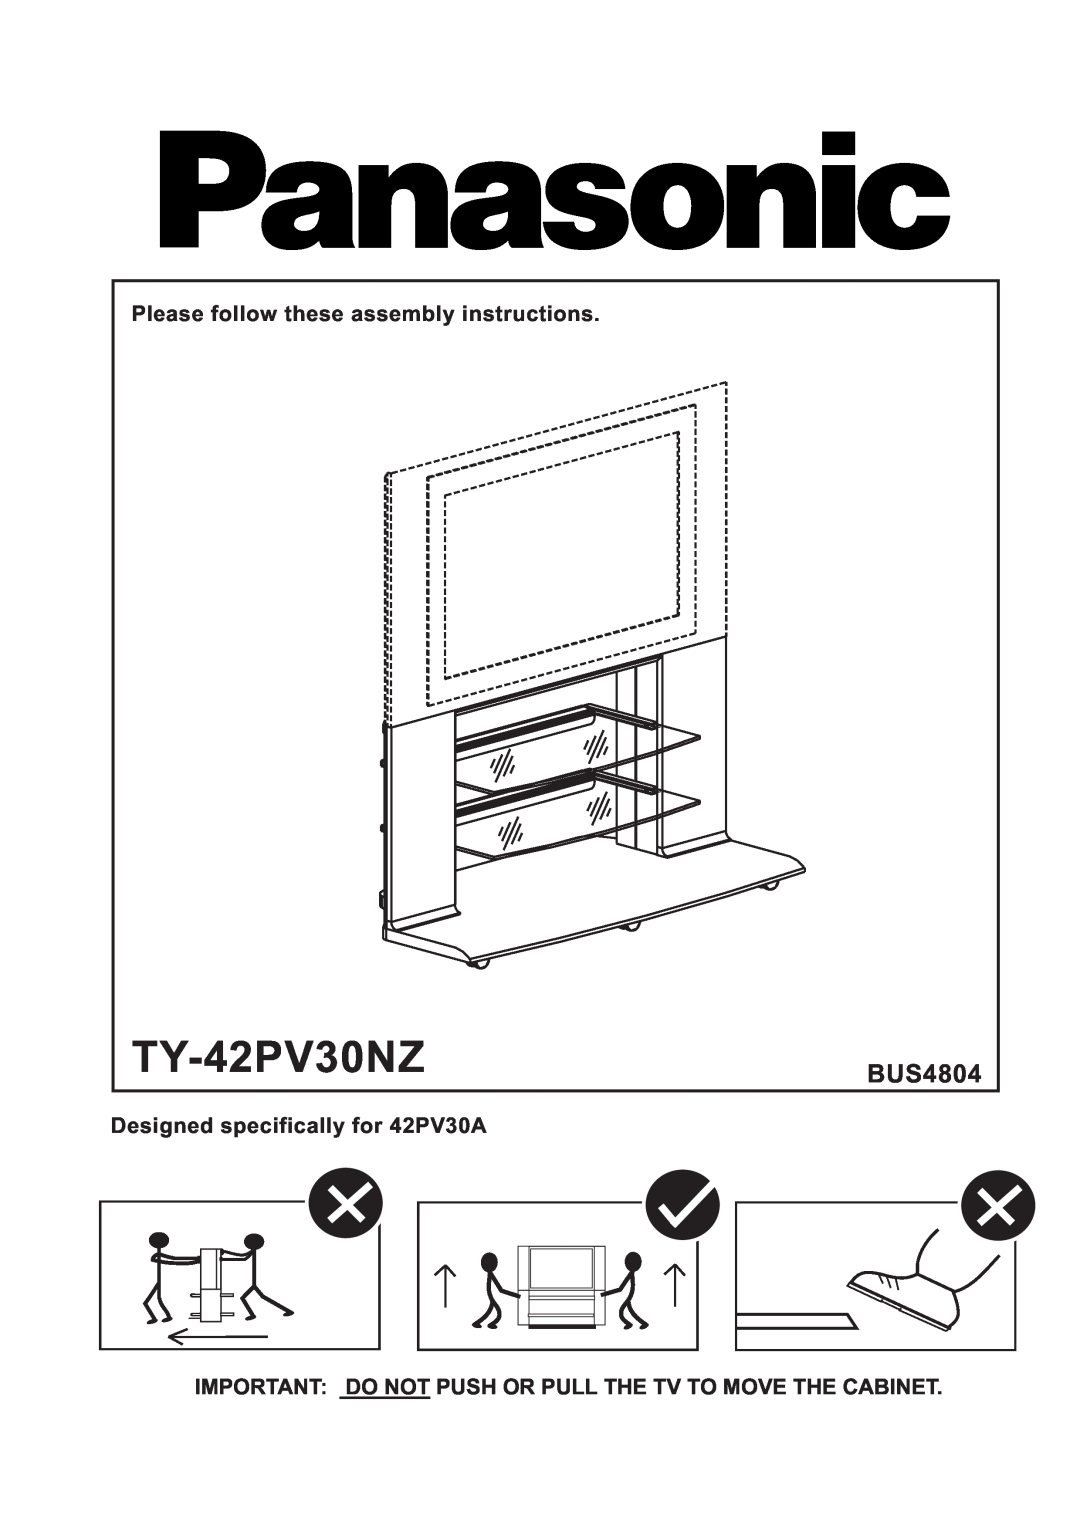 Panasonic manual TY-42PV30NZBUS4804, Please follow these assembly instructions, Designed specifically for 42PV30A 